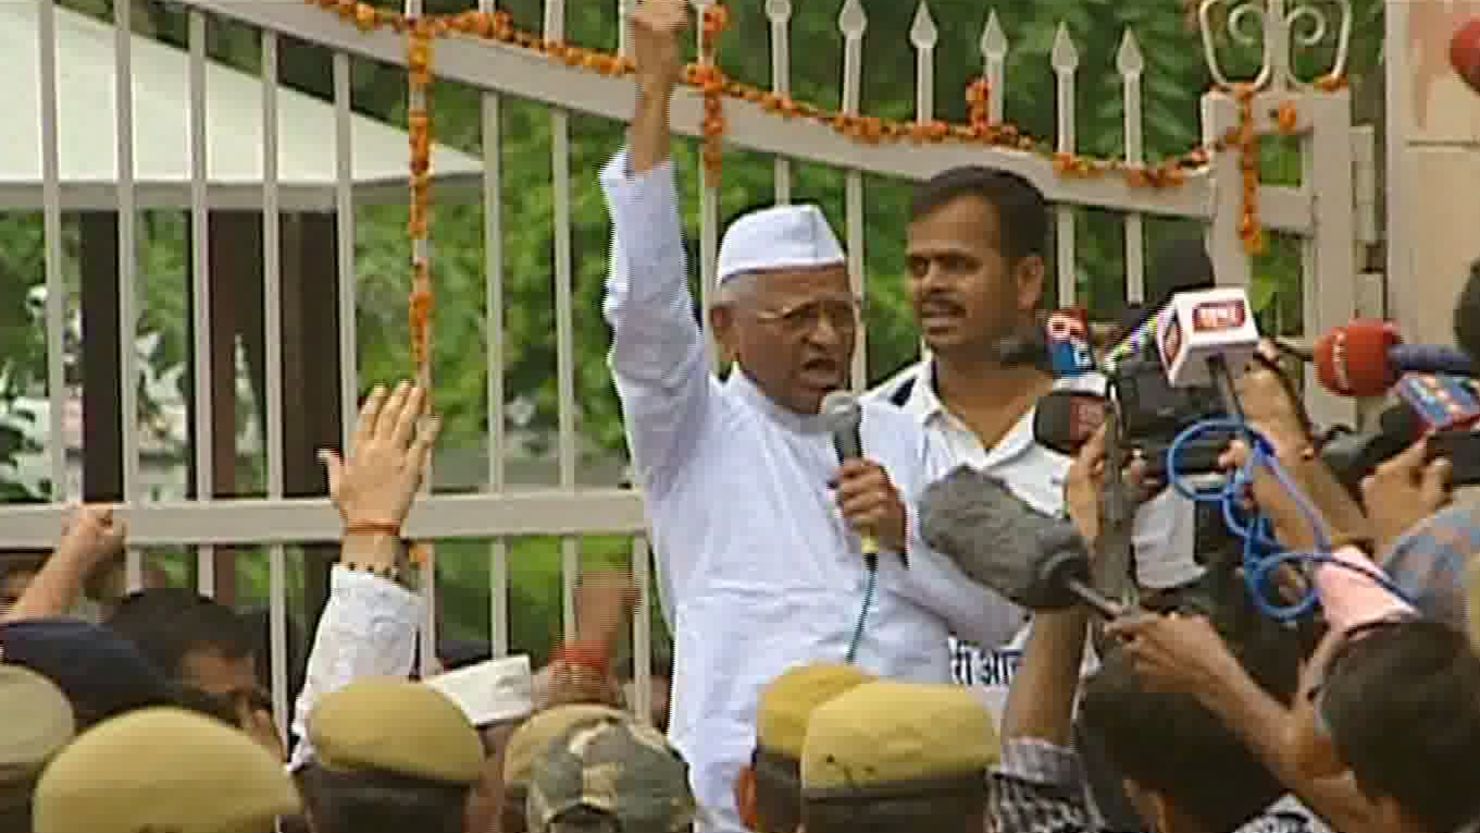 Activist Anna Hazare has slammed the anti-corruption bill as too weak to deal with endemic graft.